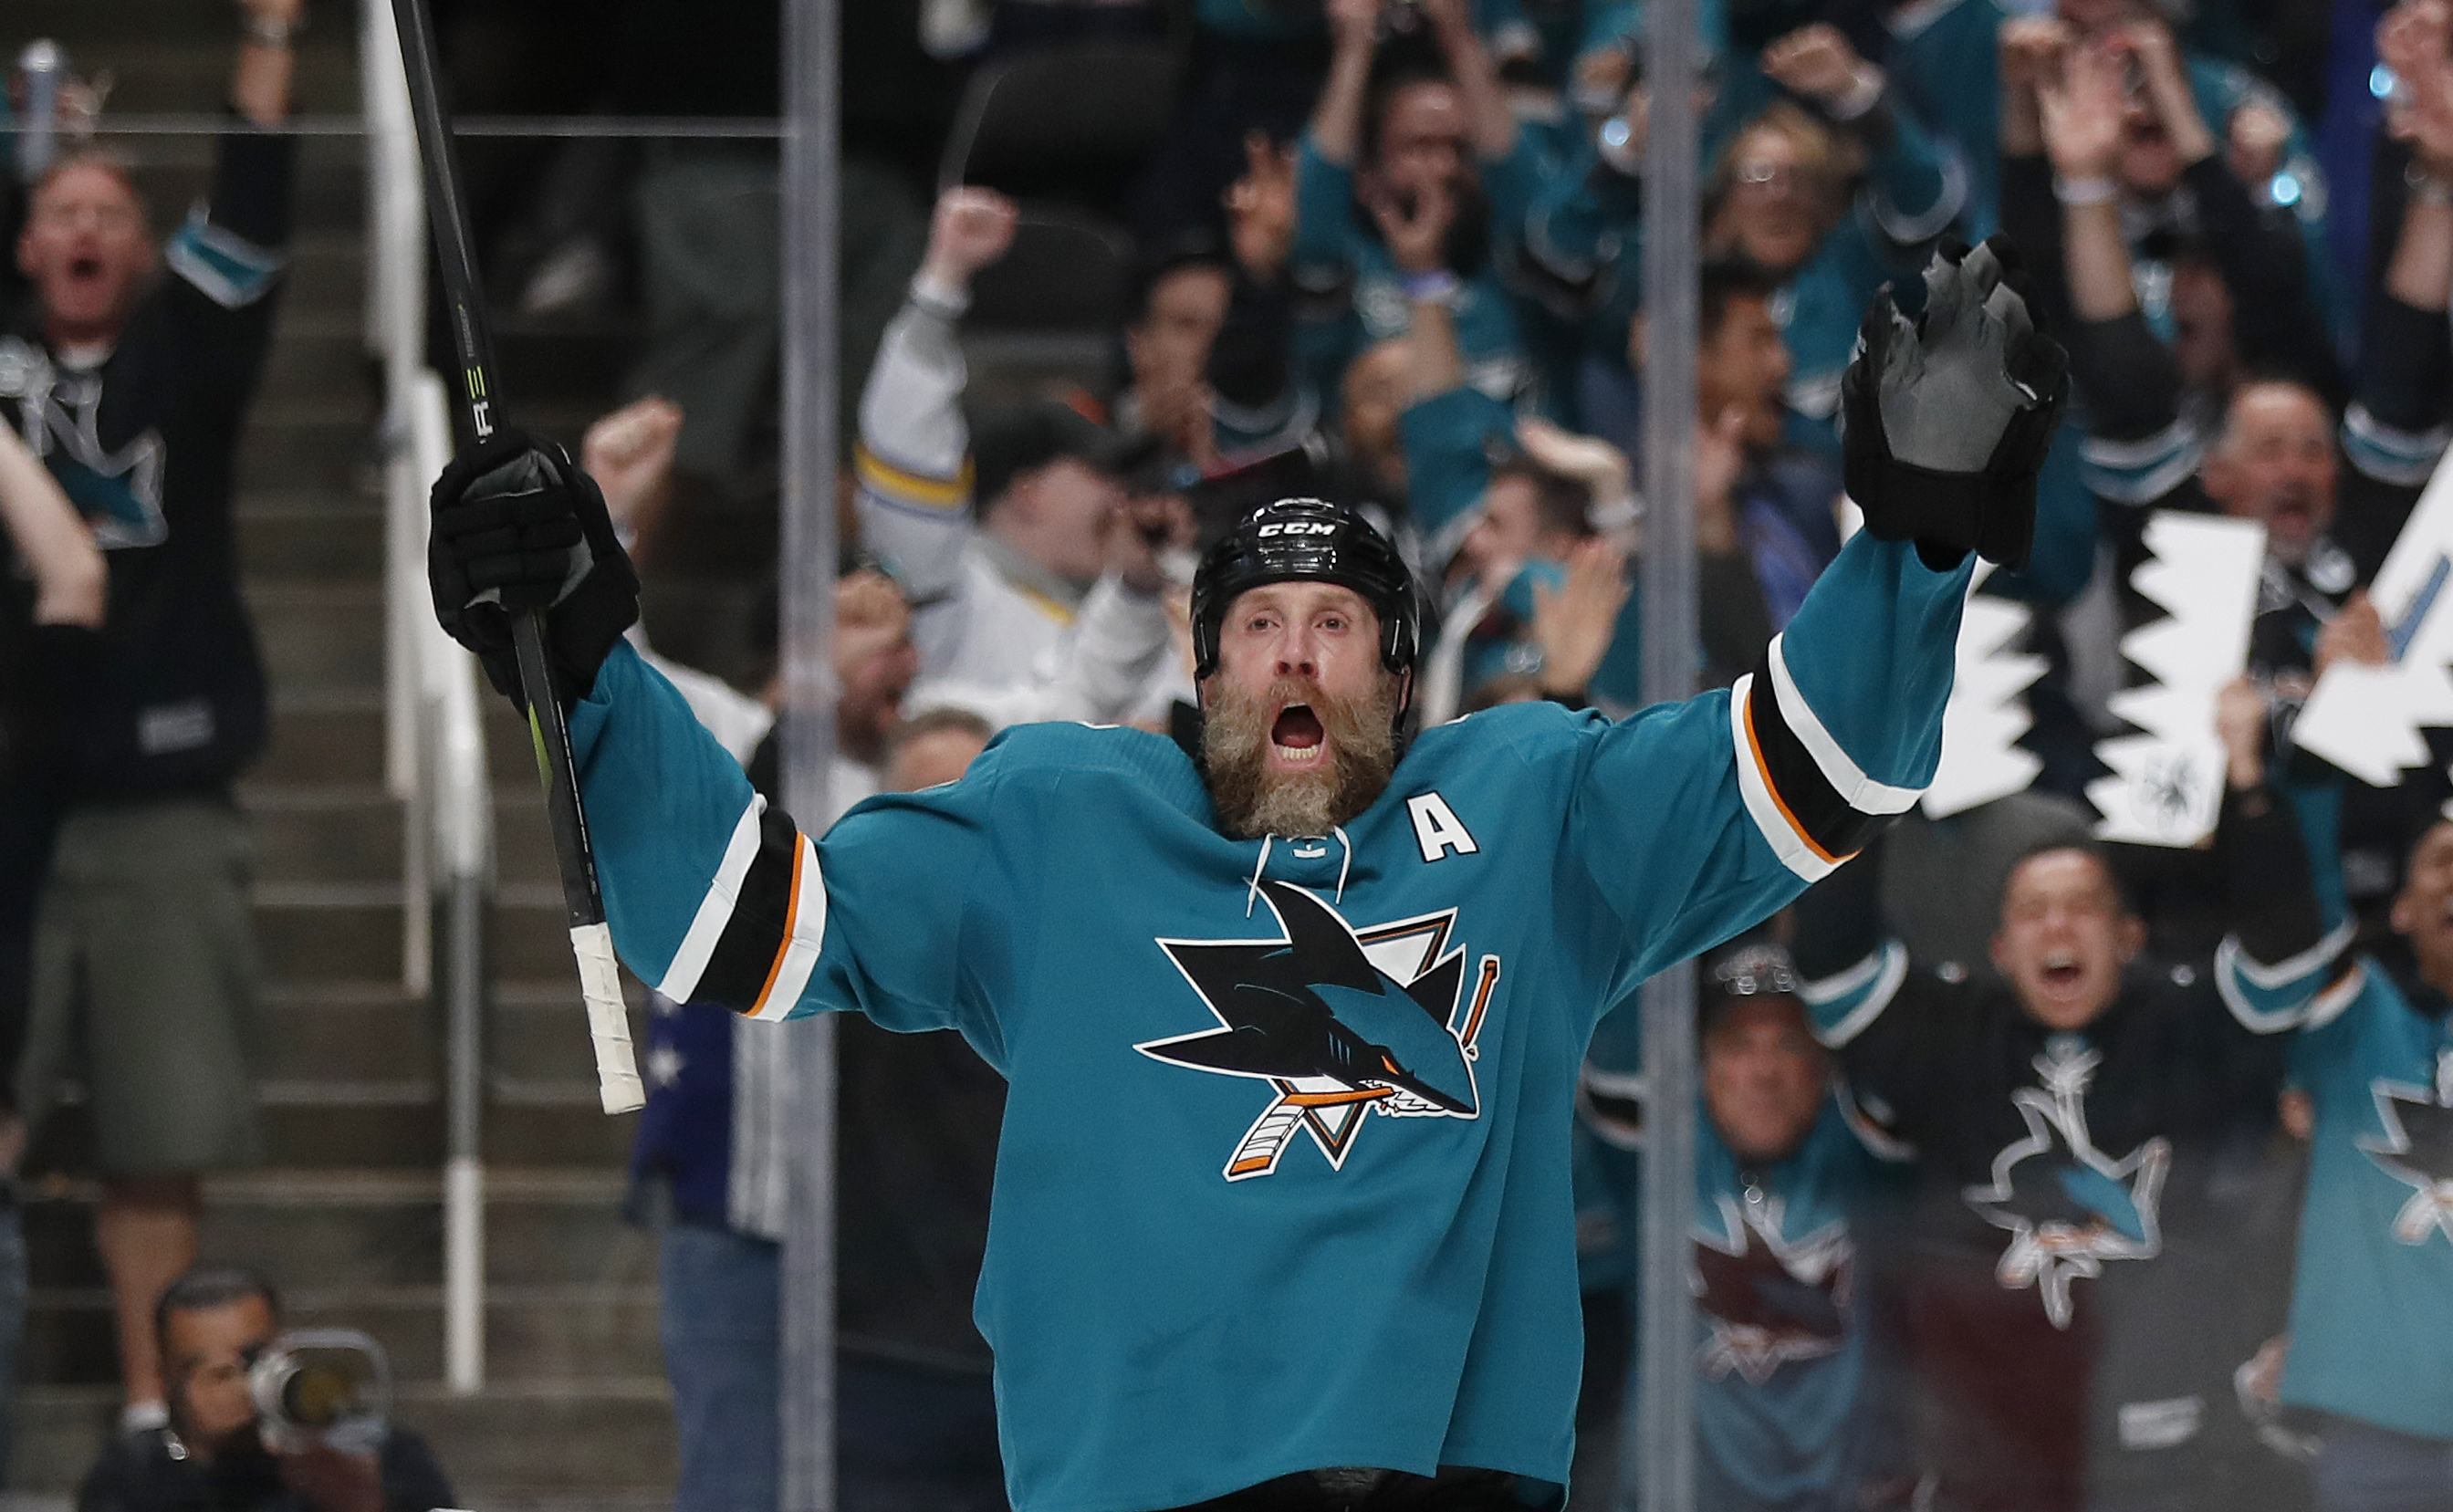 Joe Thornton: I need to win a Stanley Cup.